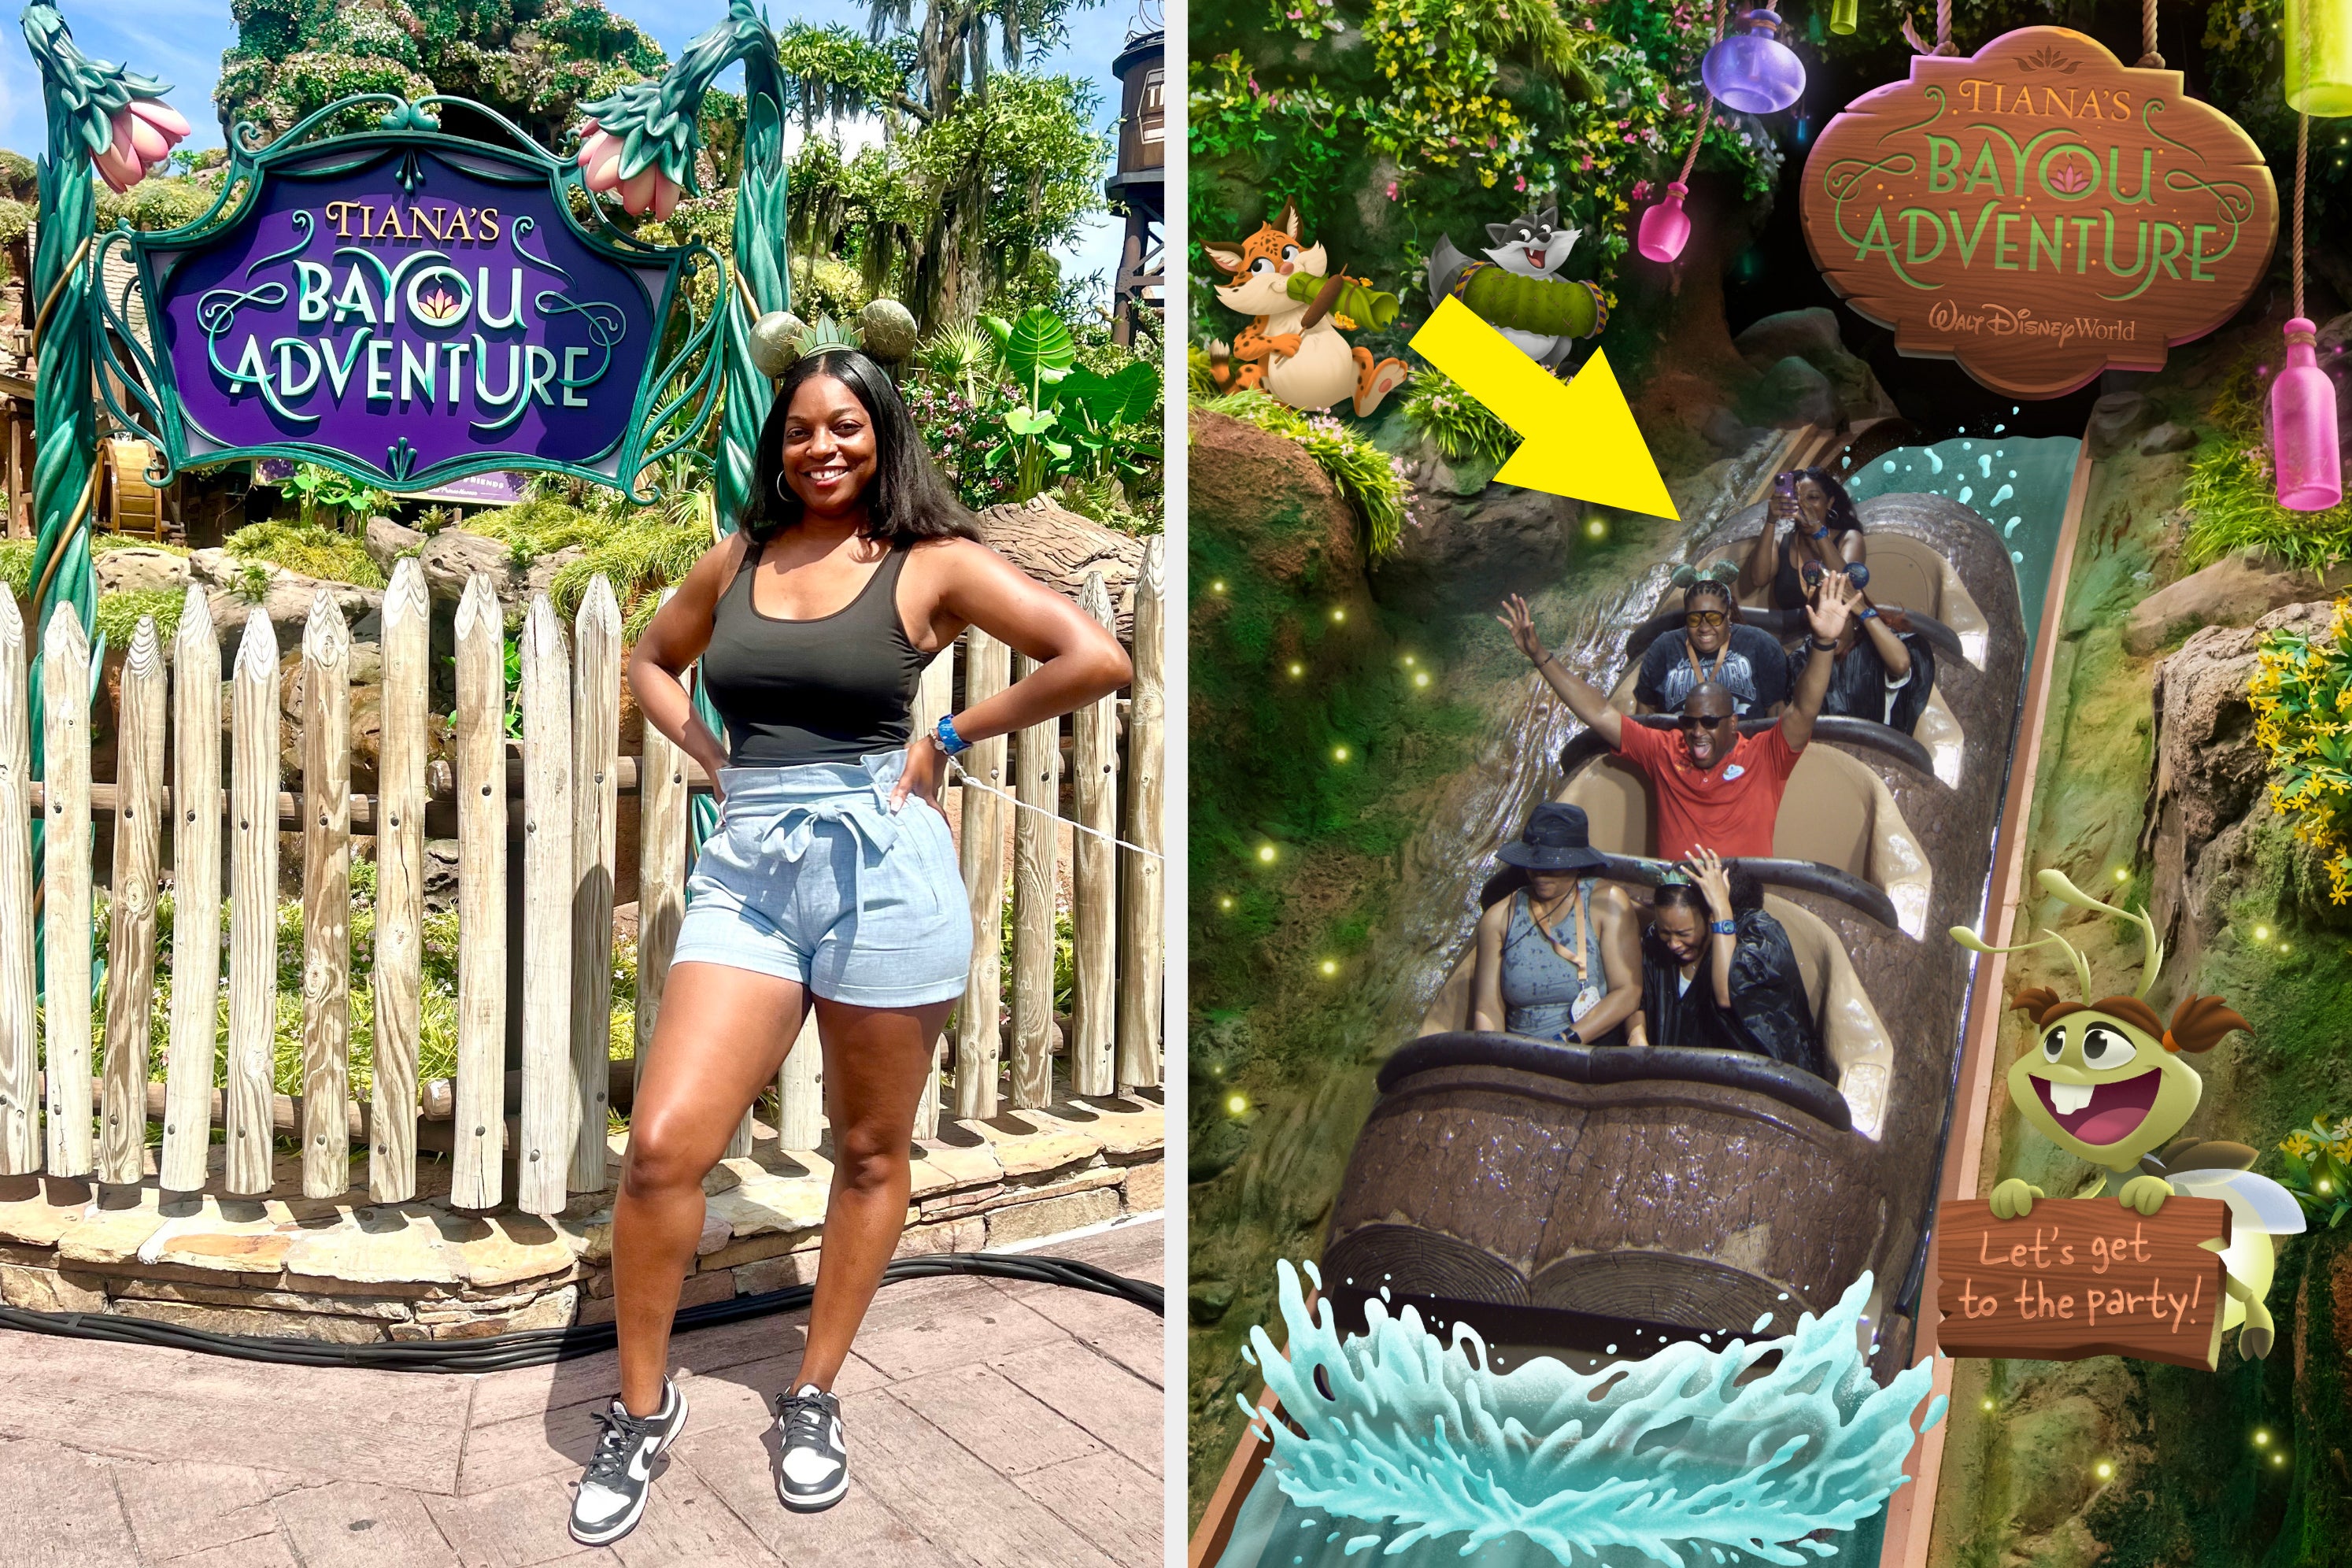 Princess Tiana's Bayou Adventure Finally Opened At Disney World And Here's All The Fun You Can Expect, If You Don't Mind Getting Wet